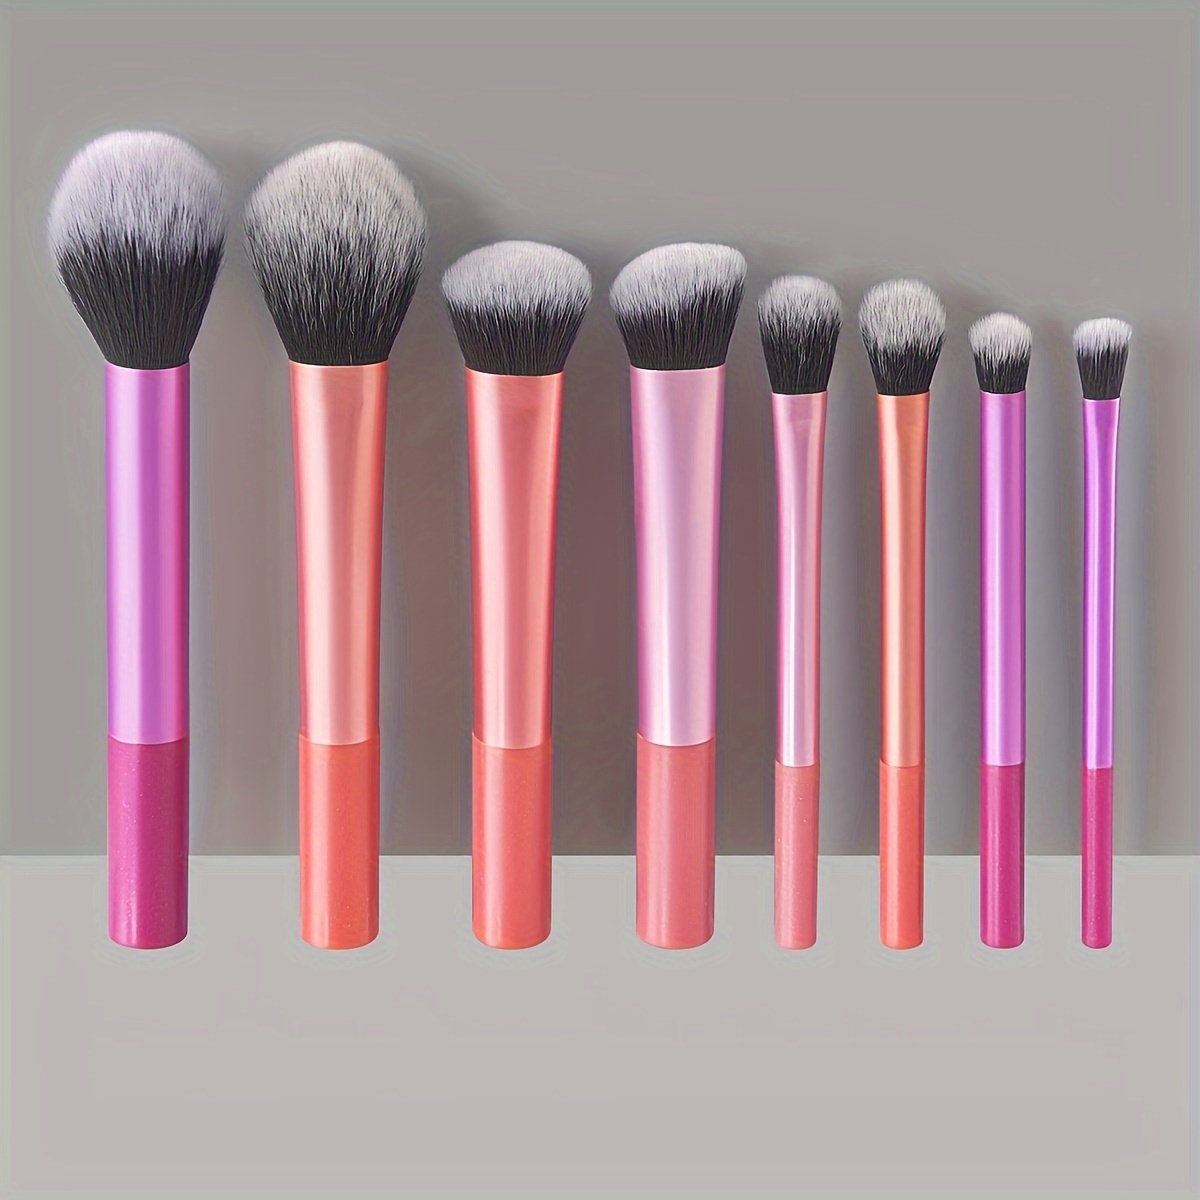 

8-piece Ultra-soft Makeup Brush Set - Includes Powder, Blush & Eyeshadow Brushes For Beginners - Fragrance-free Polyester Bristles, Abs Handle